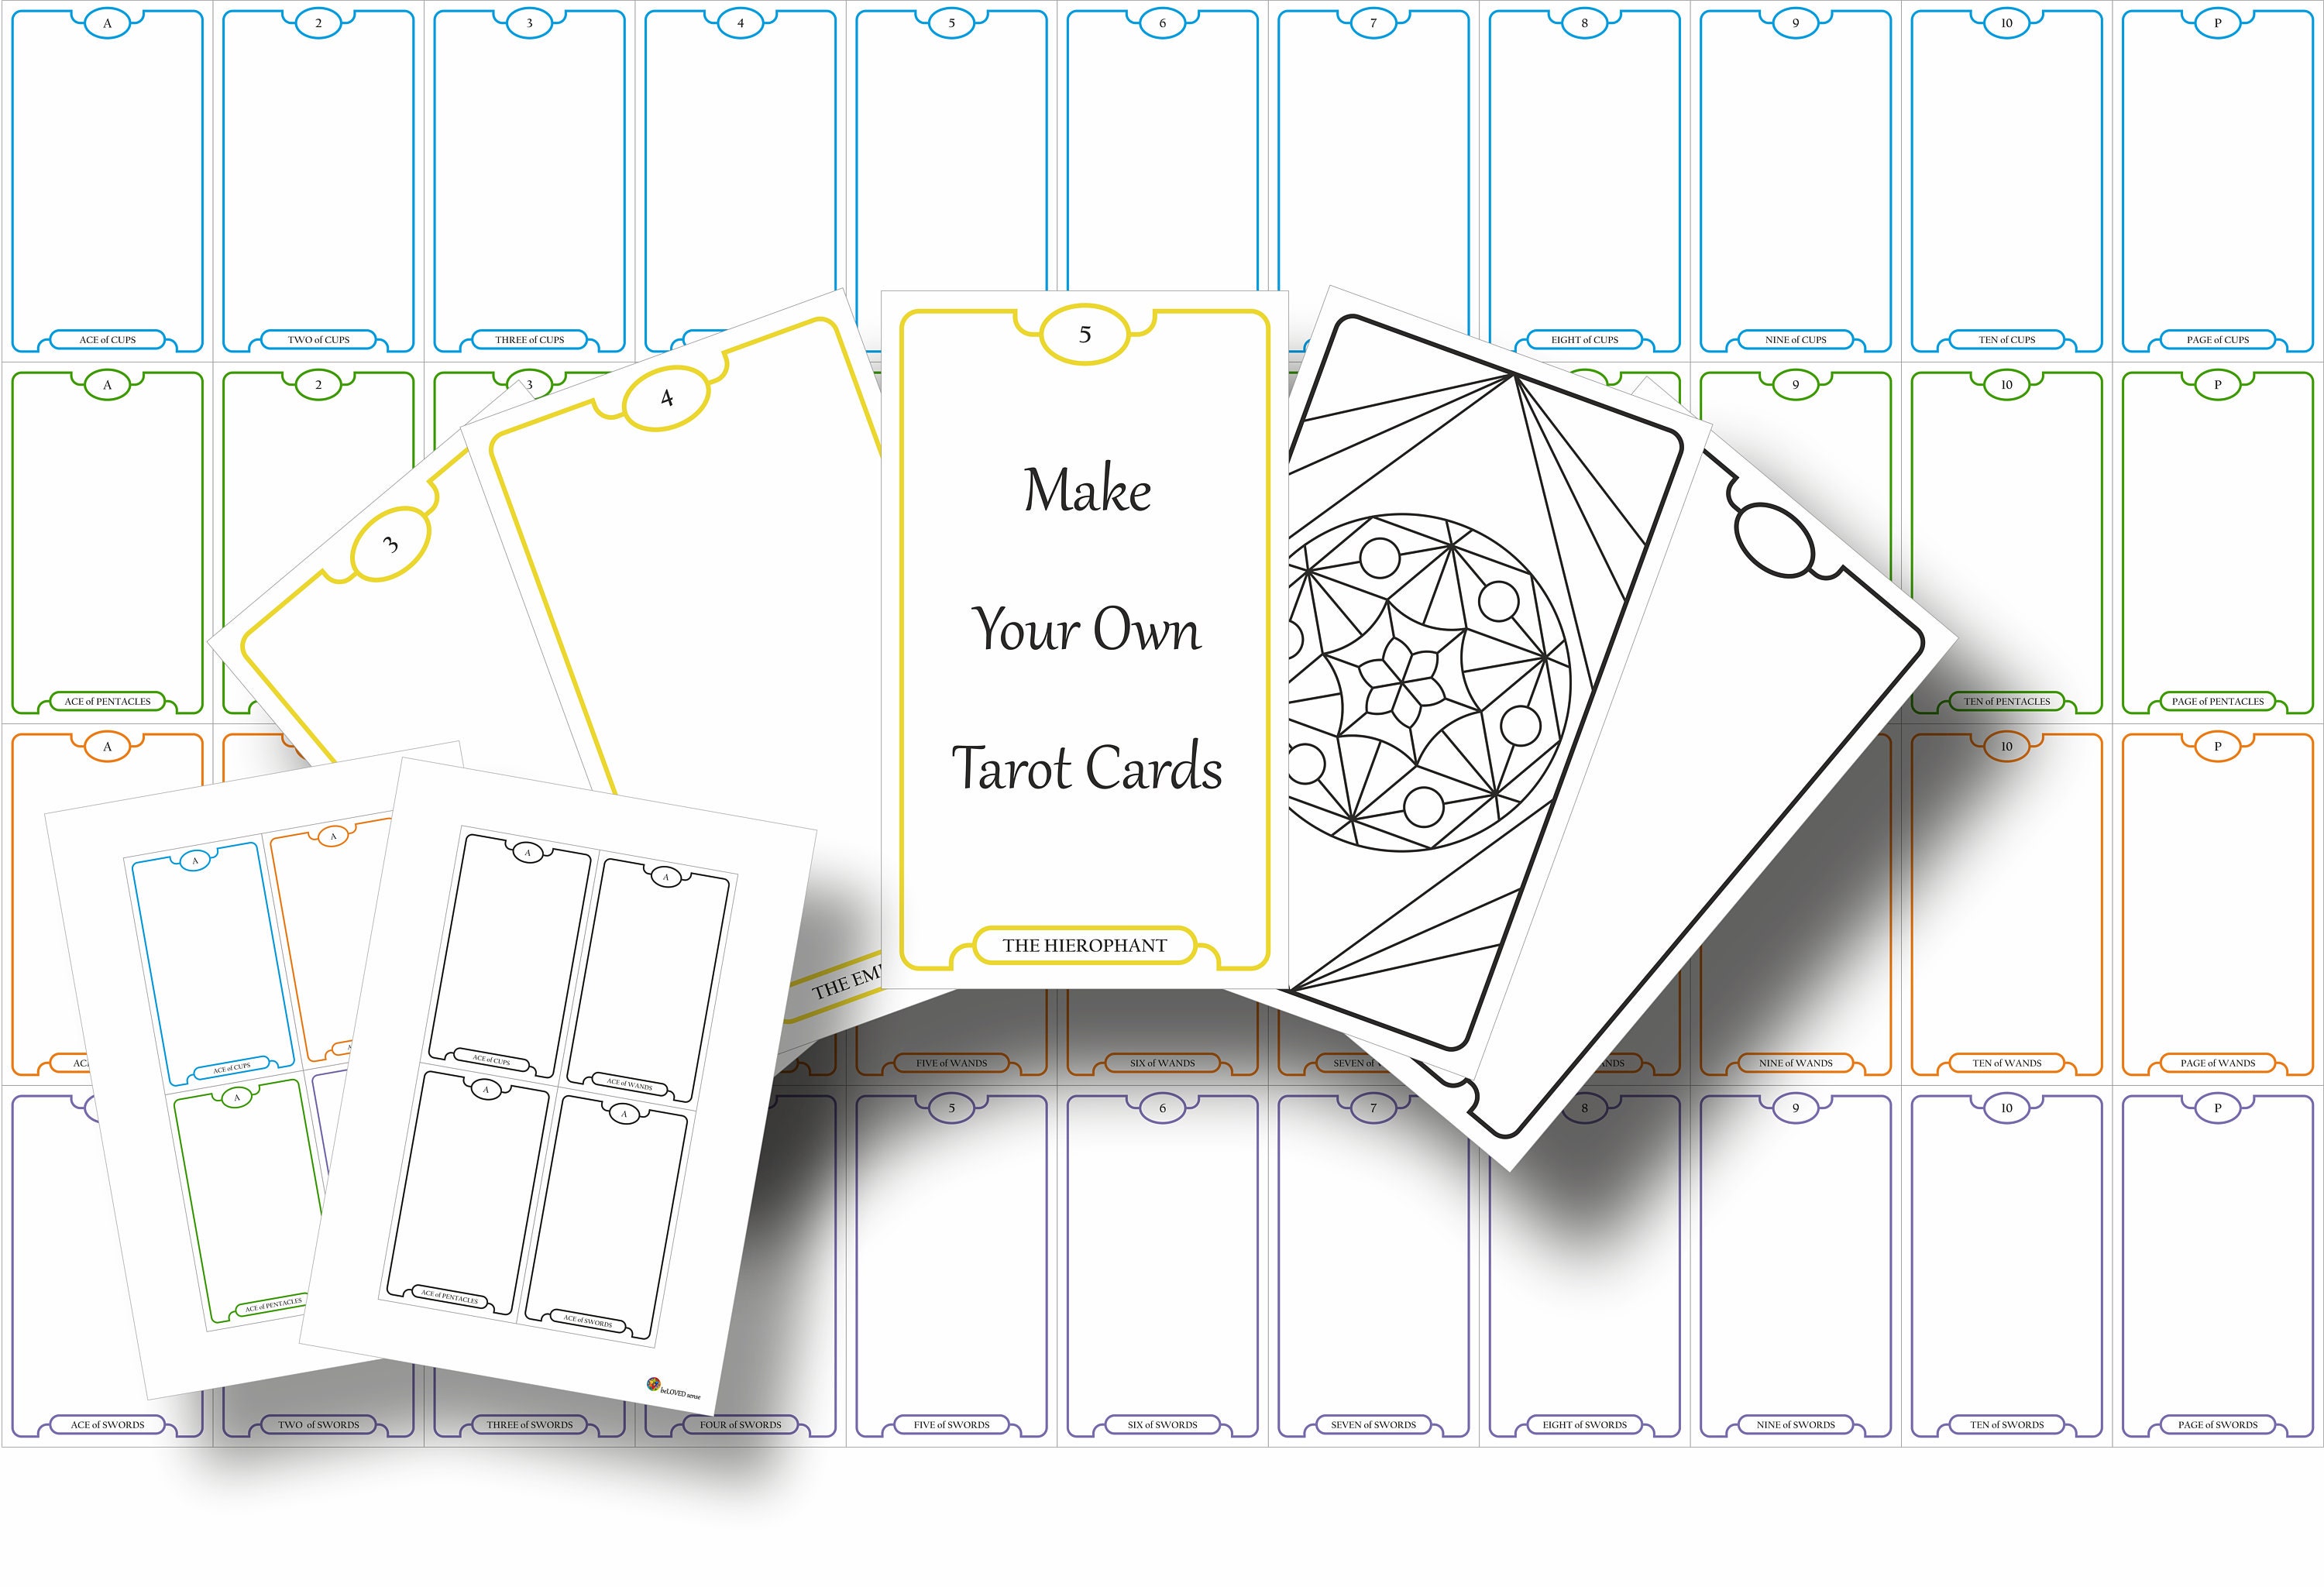 Printable Daily Tarot Journal, 3 Card Spread Tarot Diary, Tarot Pull Sheet,  Card Reading Planner Inserts for Divination and Witches 